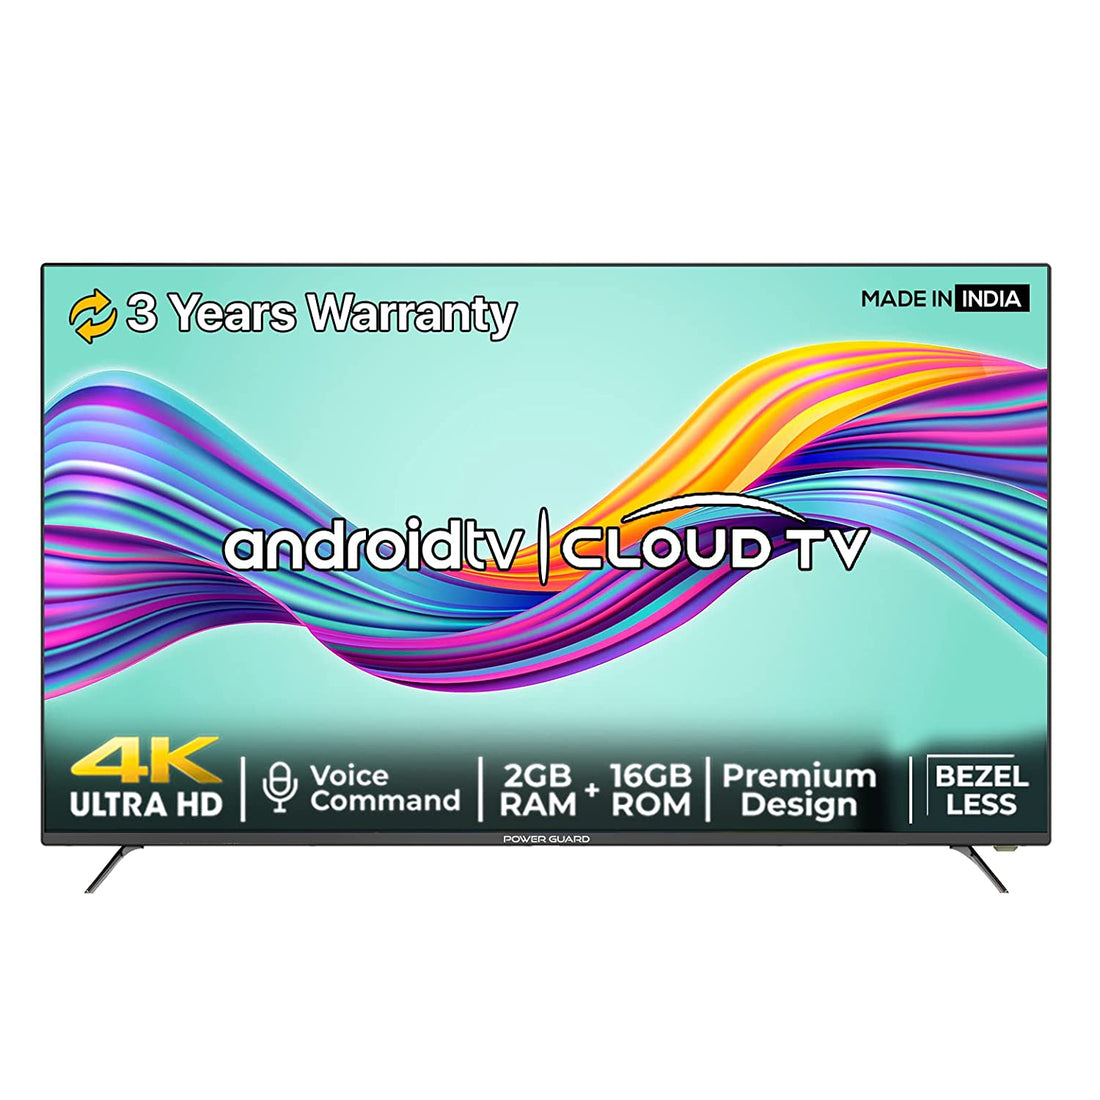 Find the Best 65 Inch 4K Android TV in India | Top Recommendations